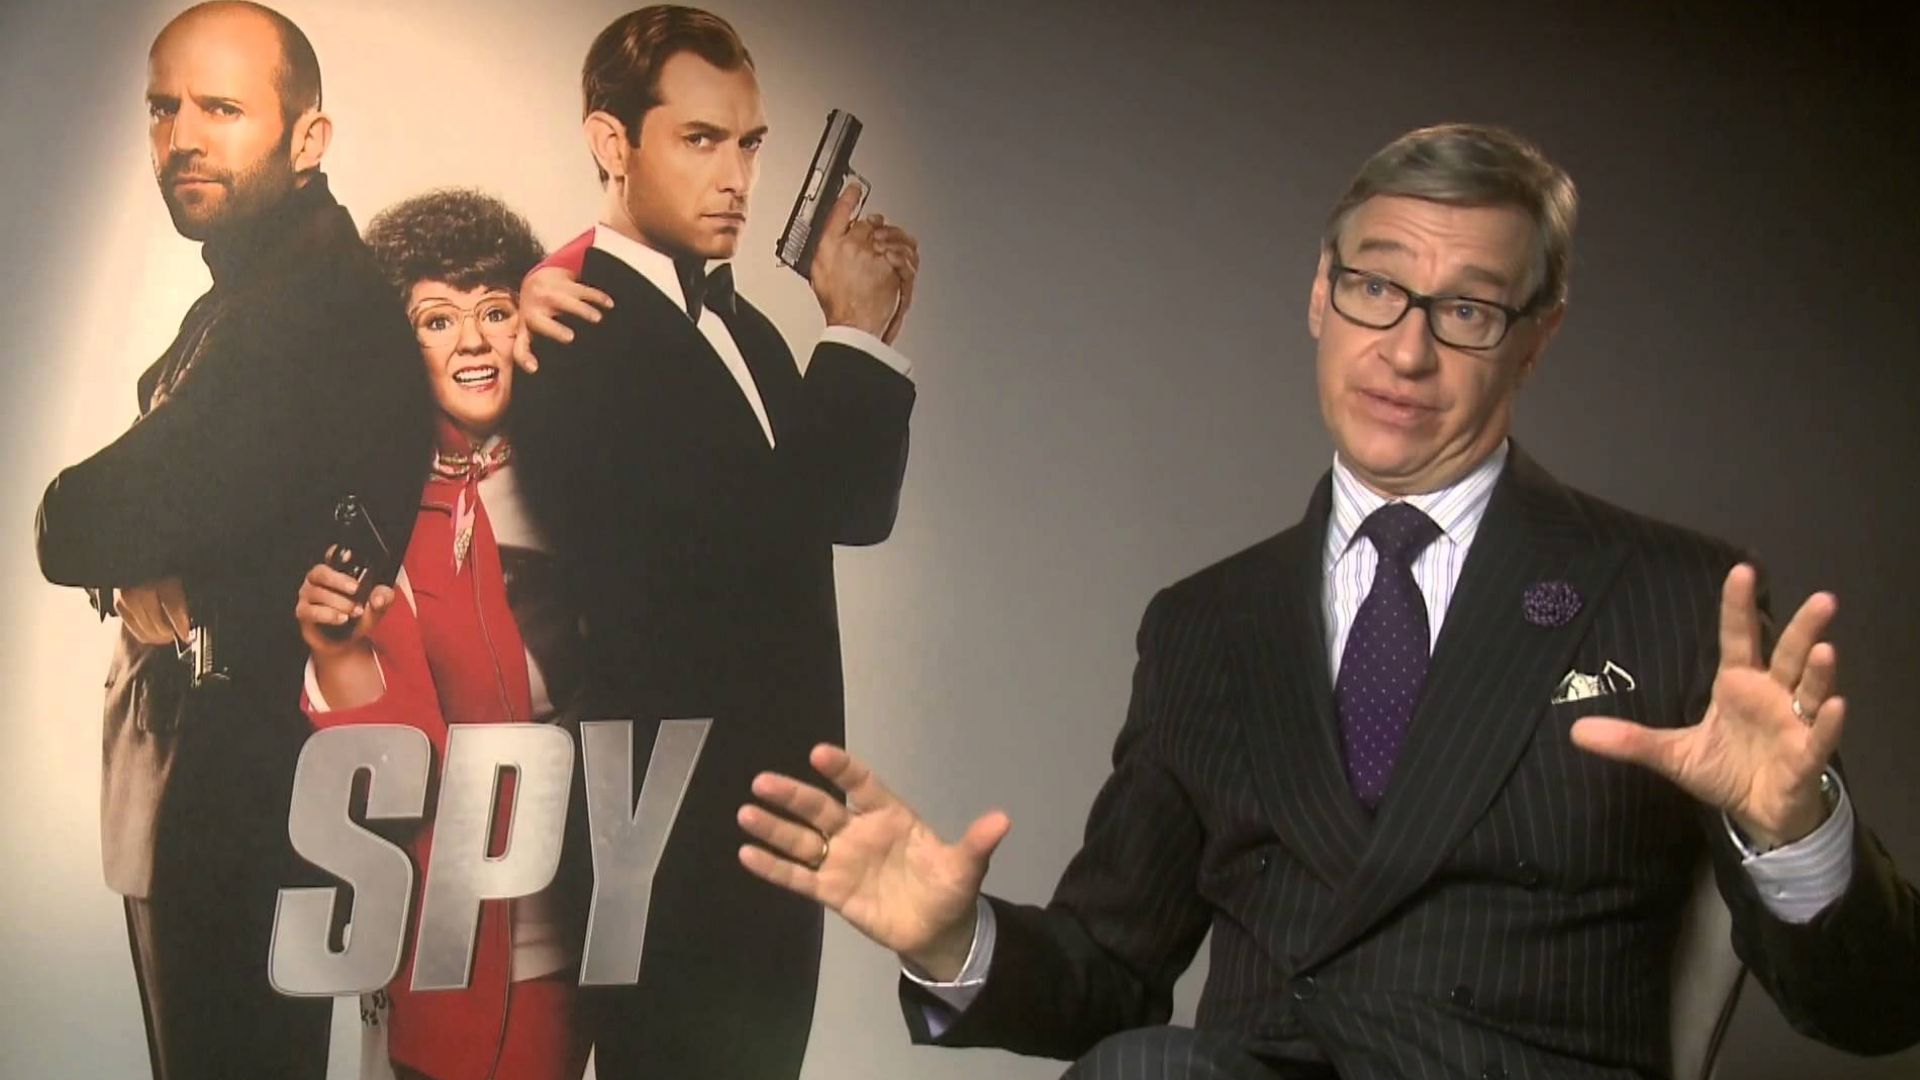 Paul Feig Talks About His Influences for &#039;Spy&#039;